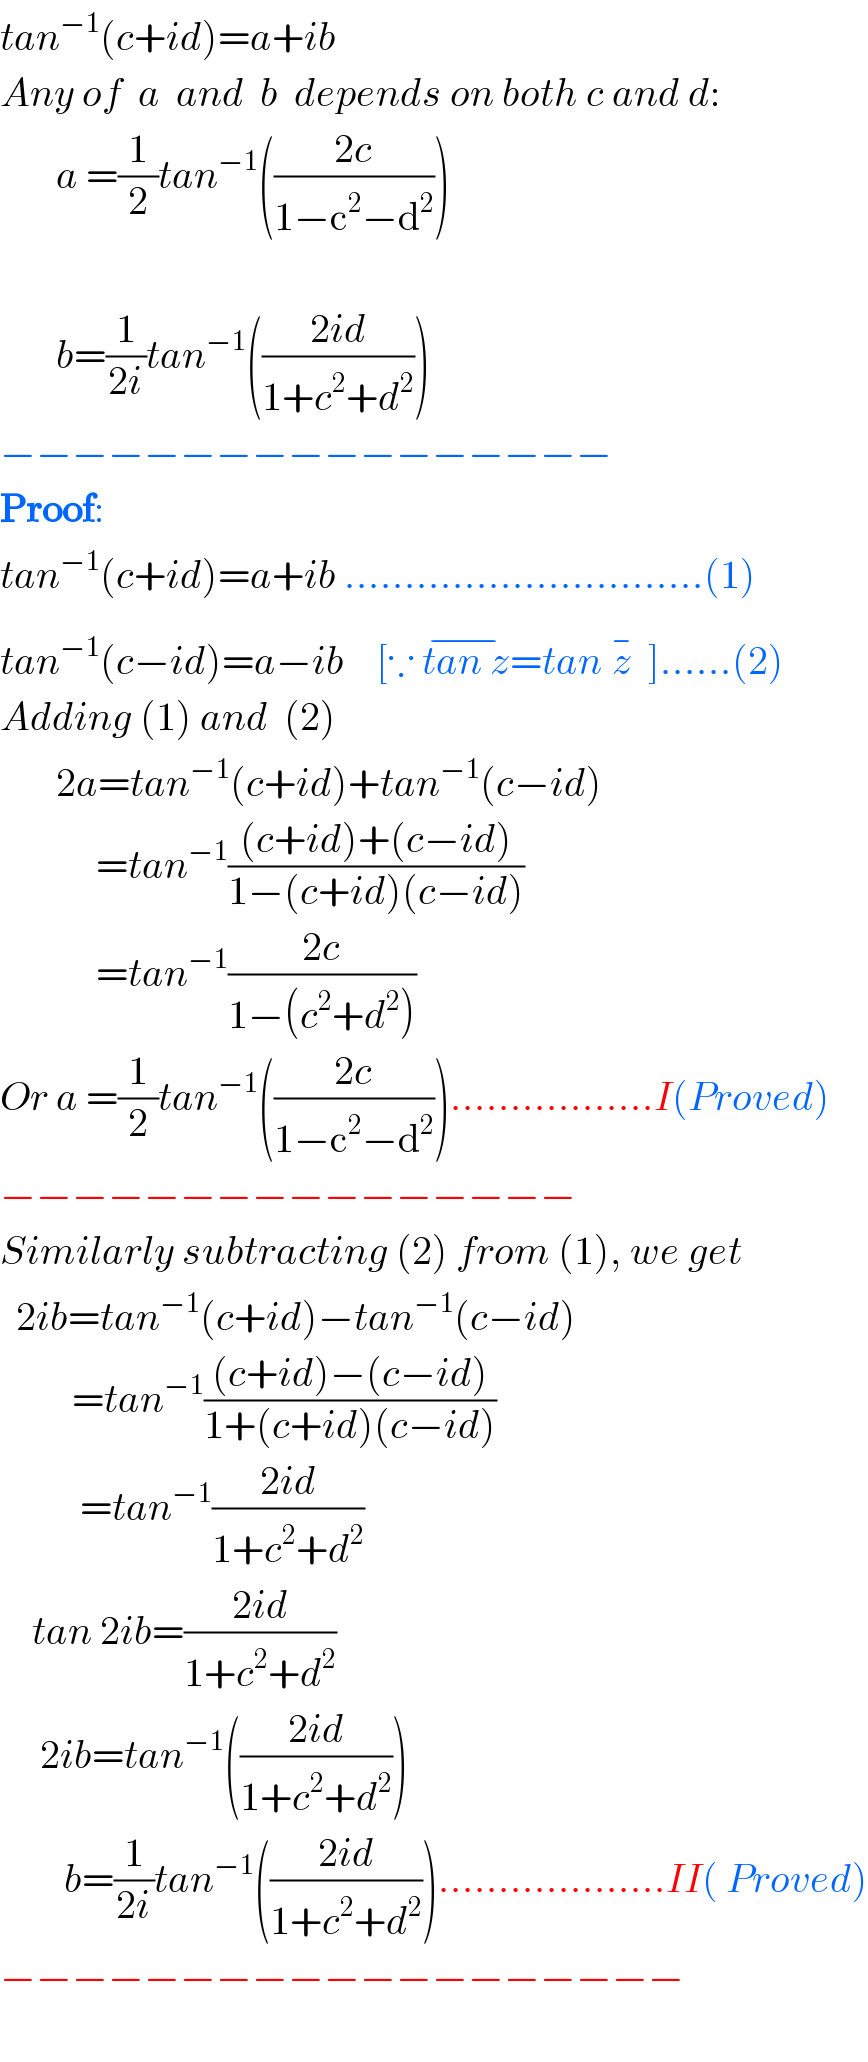 tan^(−1) (c+id)=a+ib   Any of  a  and  b  depends on both c and d:         a =(1/2)tan^(−1) (((2c)/(1−c^2 −d^2 )))                b=(1/(2i))tan^(−1) (((2id)/(1+c^2 +d^2 )))  −−−−−−−−−−−−−−−−−  Proof:  tan^(−1) (c+id)=a+ib ..............................(1)  tan^(−1) (c−id)=a−ib    [∵ tan z^(−) =tan z^(−)   ]......(2)  Adding (1) and  (2)         2a=tan^(−1) (c+id)+tan^(−1) (c−id)              =tan^(−1) (((c+id)+(c−id))/(1−(c+id)(c−id)))              =tan^(−1) ((2c)/(1−(c^2 +d^2 )))  Or a =(1/2)tan^(−1) (((2c)/(1−c^2 −d^2 ))).................I(Proved)  −−−−−−−−−−−−−−−−  Similarly subtracting (2) from (1), we get    2ib=tan^(−1) (c+id)−tan^(−1) (c−id)           =tan^(−1) (((c+id)−(c−id))/(1+(c+id)(c−id)))            =tan^(−1) ((2id)/(1+c^2 +d^2 ))      tan 2ib=((2id)/(1+c^2 +d^2 ))       2ib=tan^(−1) (((2id)/(1+c^2 +d^2 )))          b=(1/(2i))tan^(−1) (((2id)/(1+c^2 +d^2 )))...................II( Proved)  −−−−−−−−−−−−−−−−−−−    